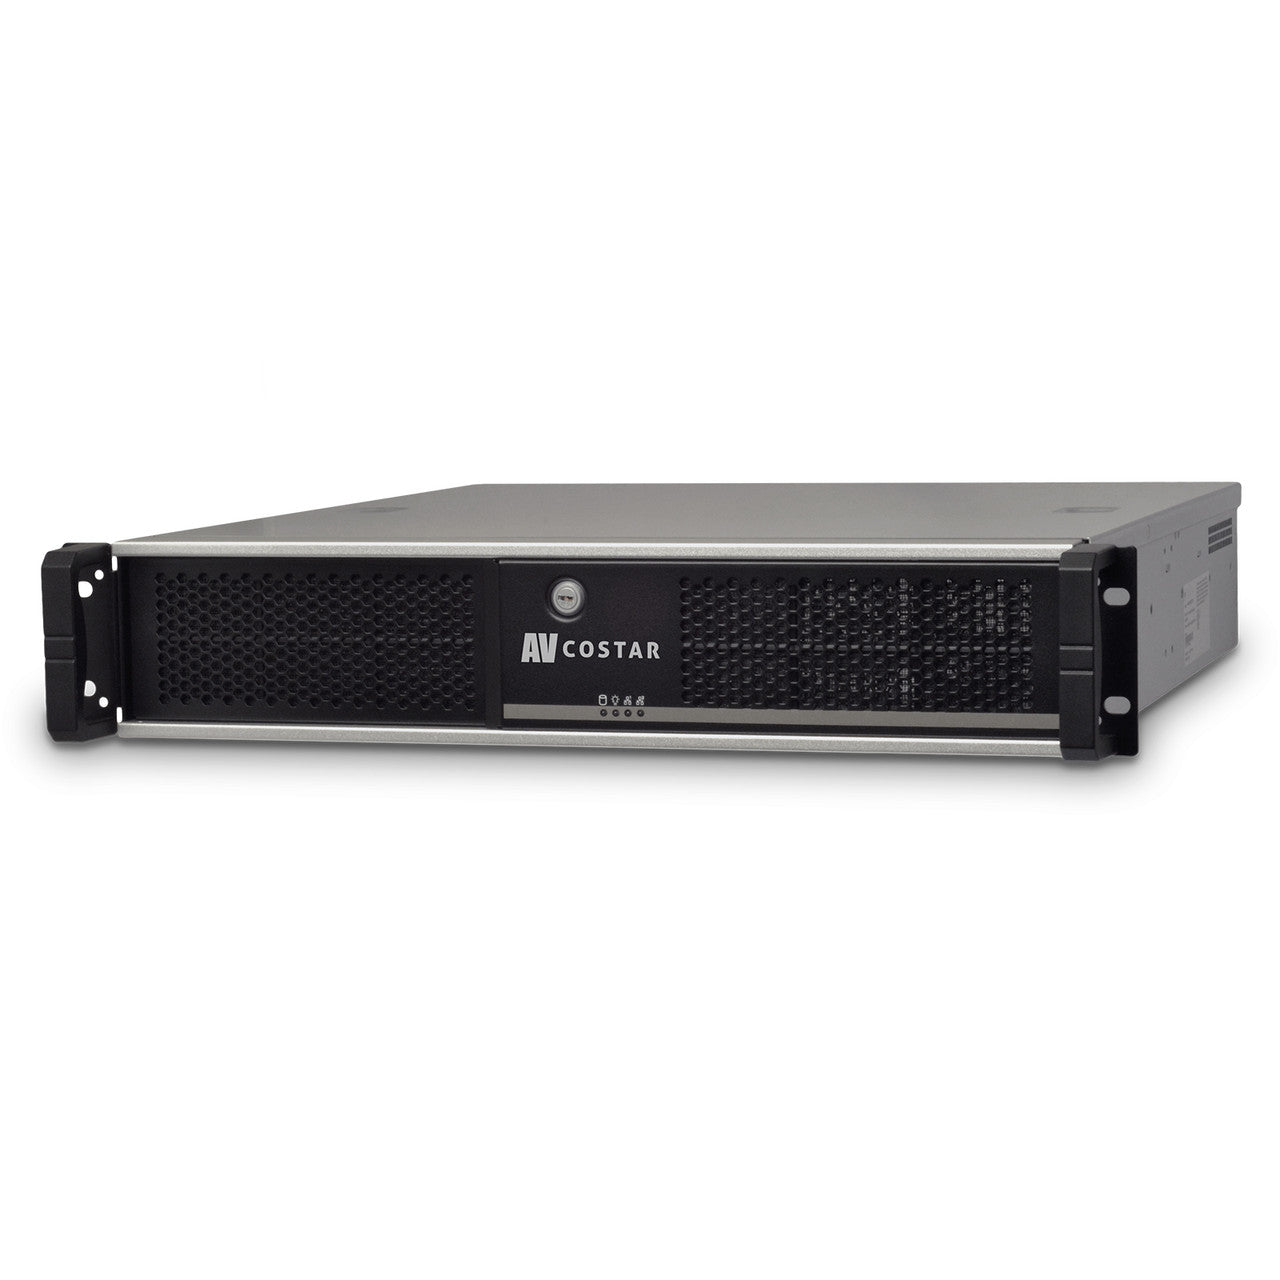 Arecont Vision AV-CSCX48T 2U Compact Server, Linux, 48TB, Removable HDD Bay (Recording Licenses Not Included)